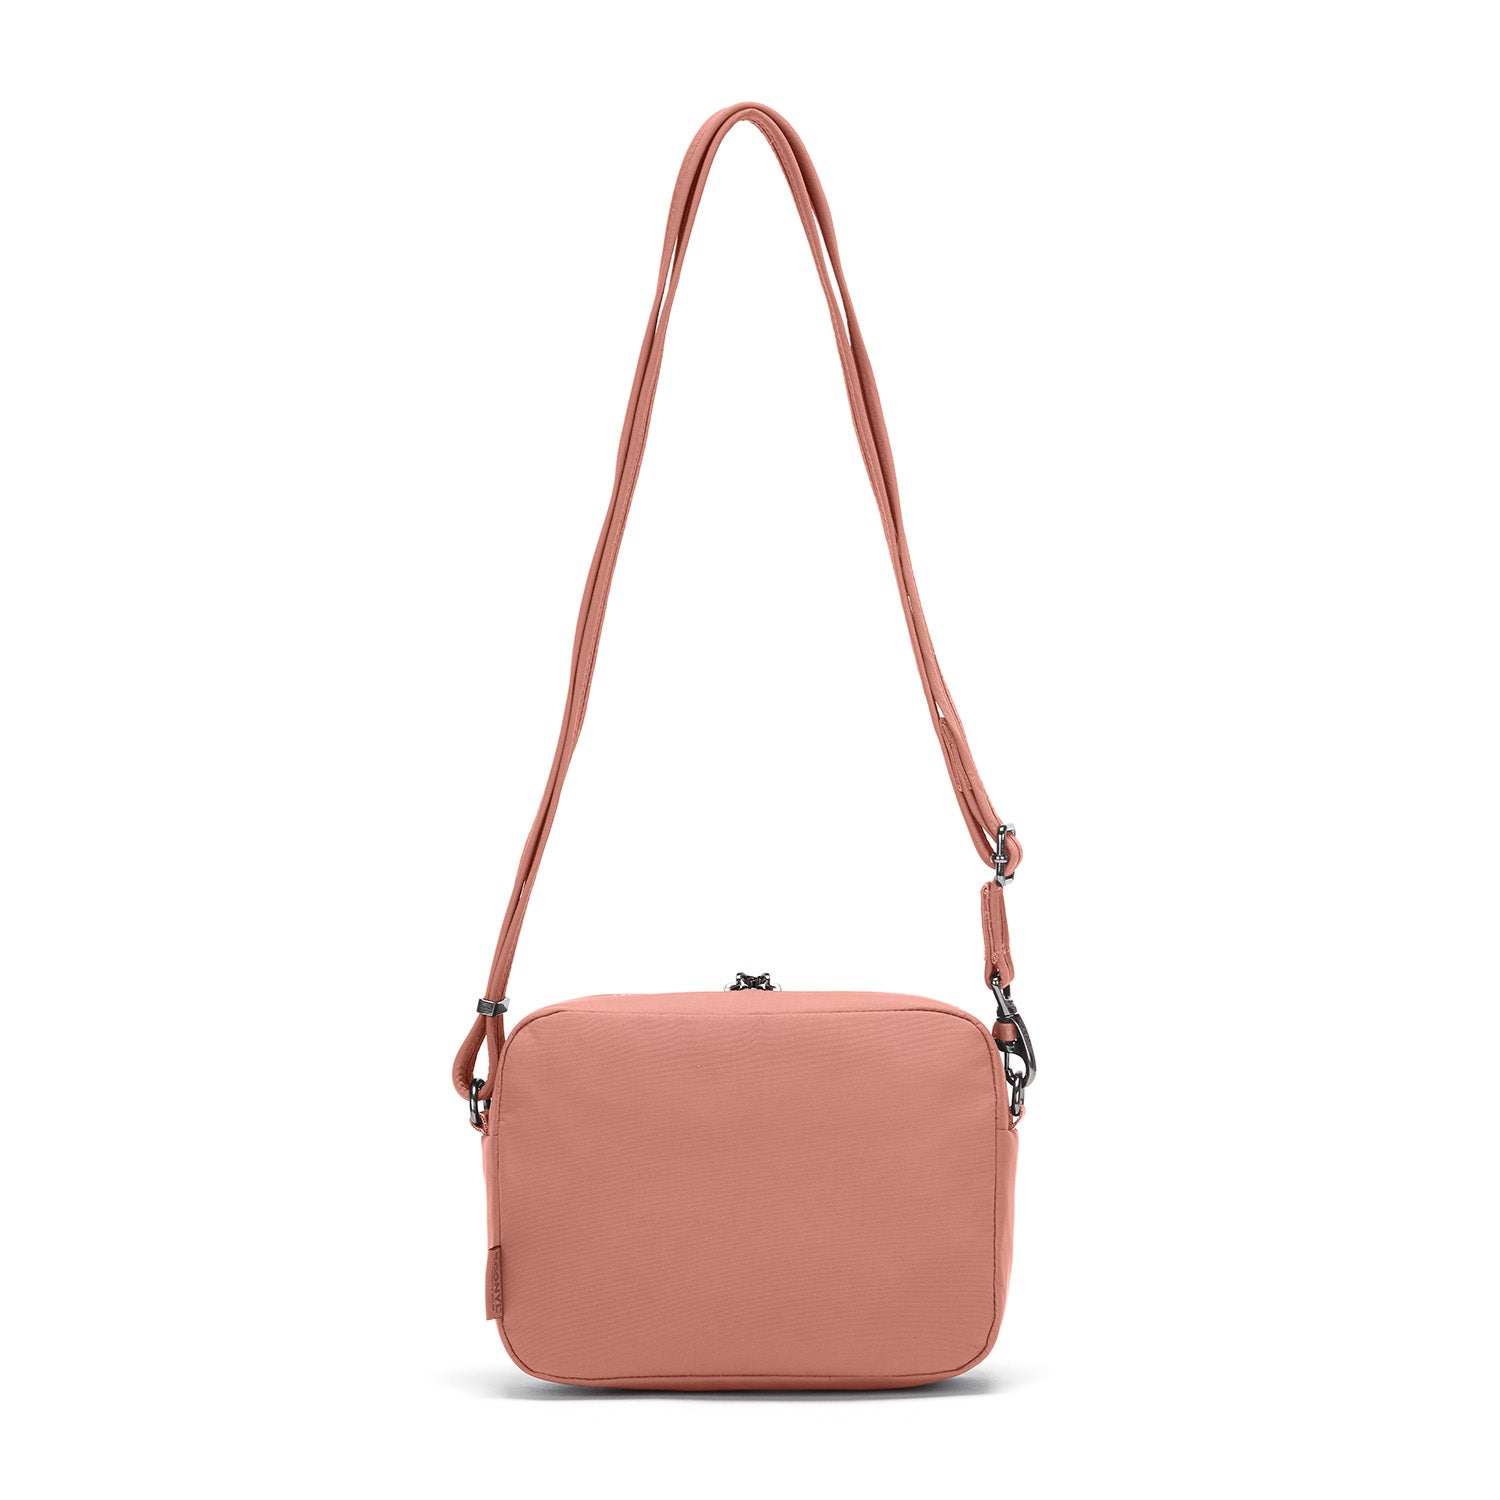 IHKWIP Day to Day Convertible Crossbody with Two Straps - QVC.com